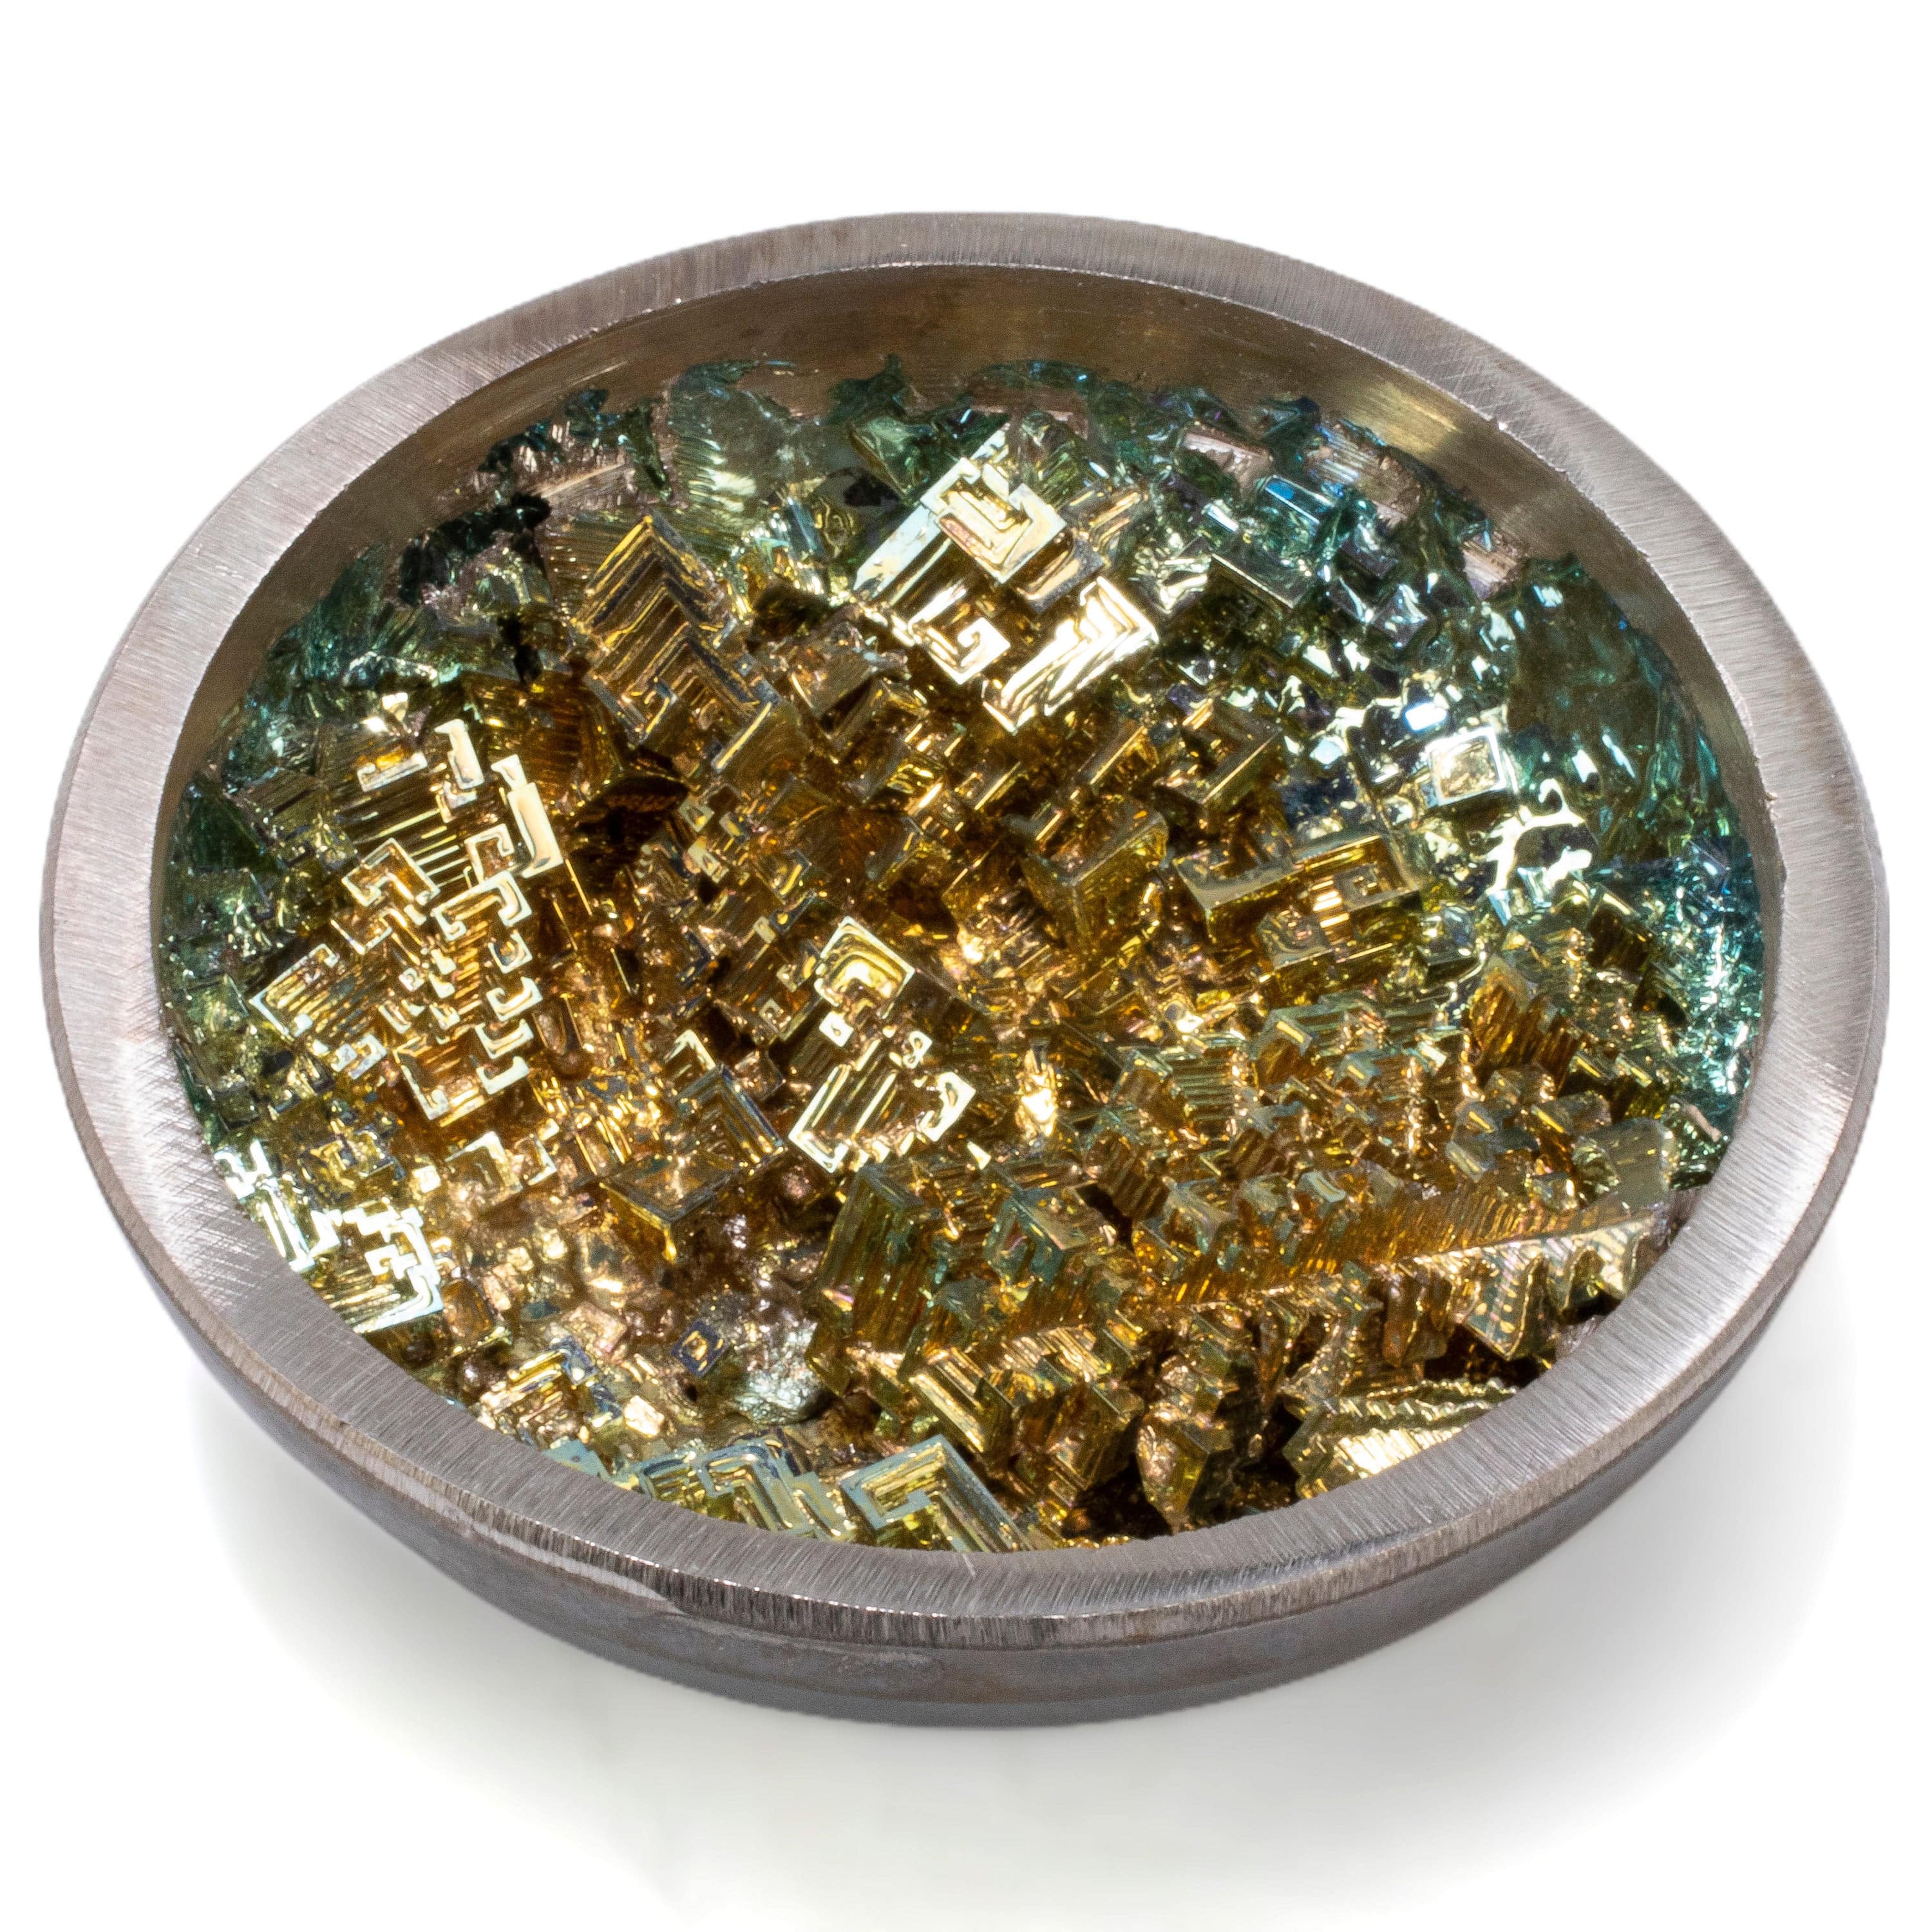 KALIFANO TUMBLED STONES Yellow Bismuth Ore Bowl - 4" BISMUTH-B-YL